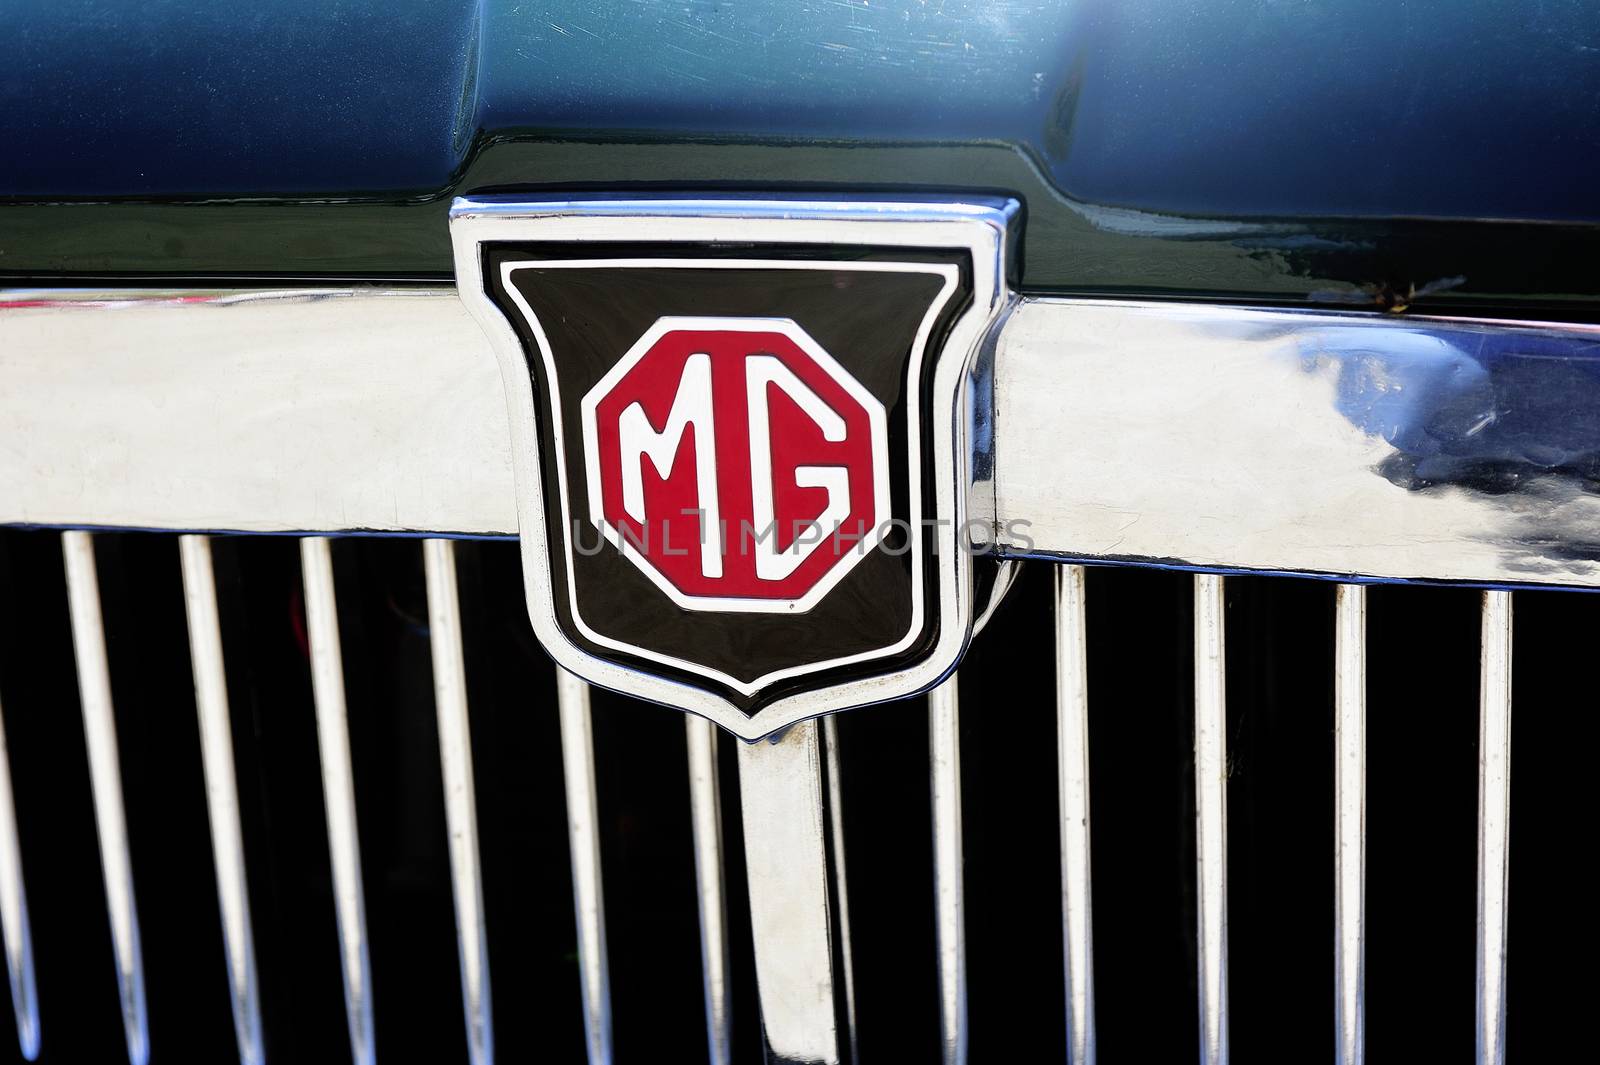 Detail of the MG brand on an old car radiator by gillespaire